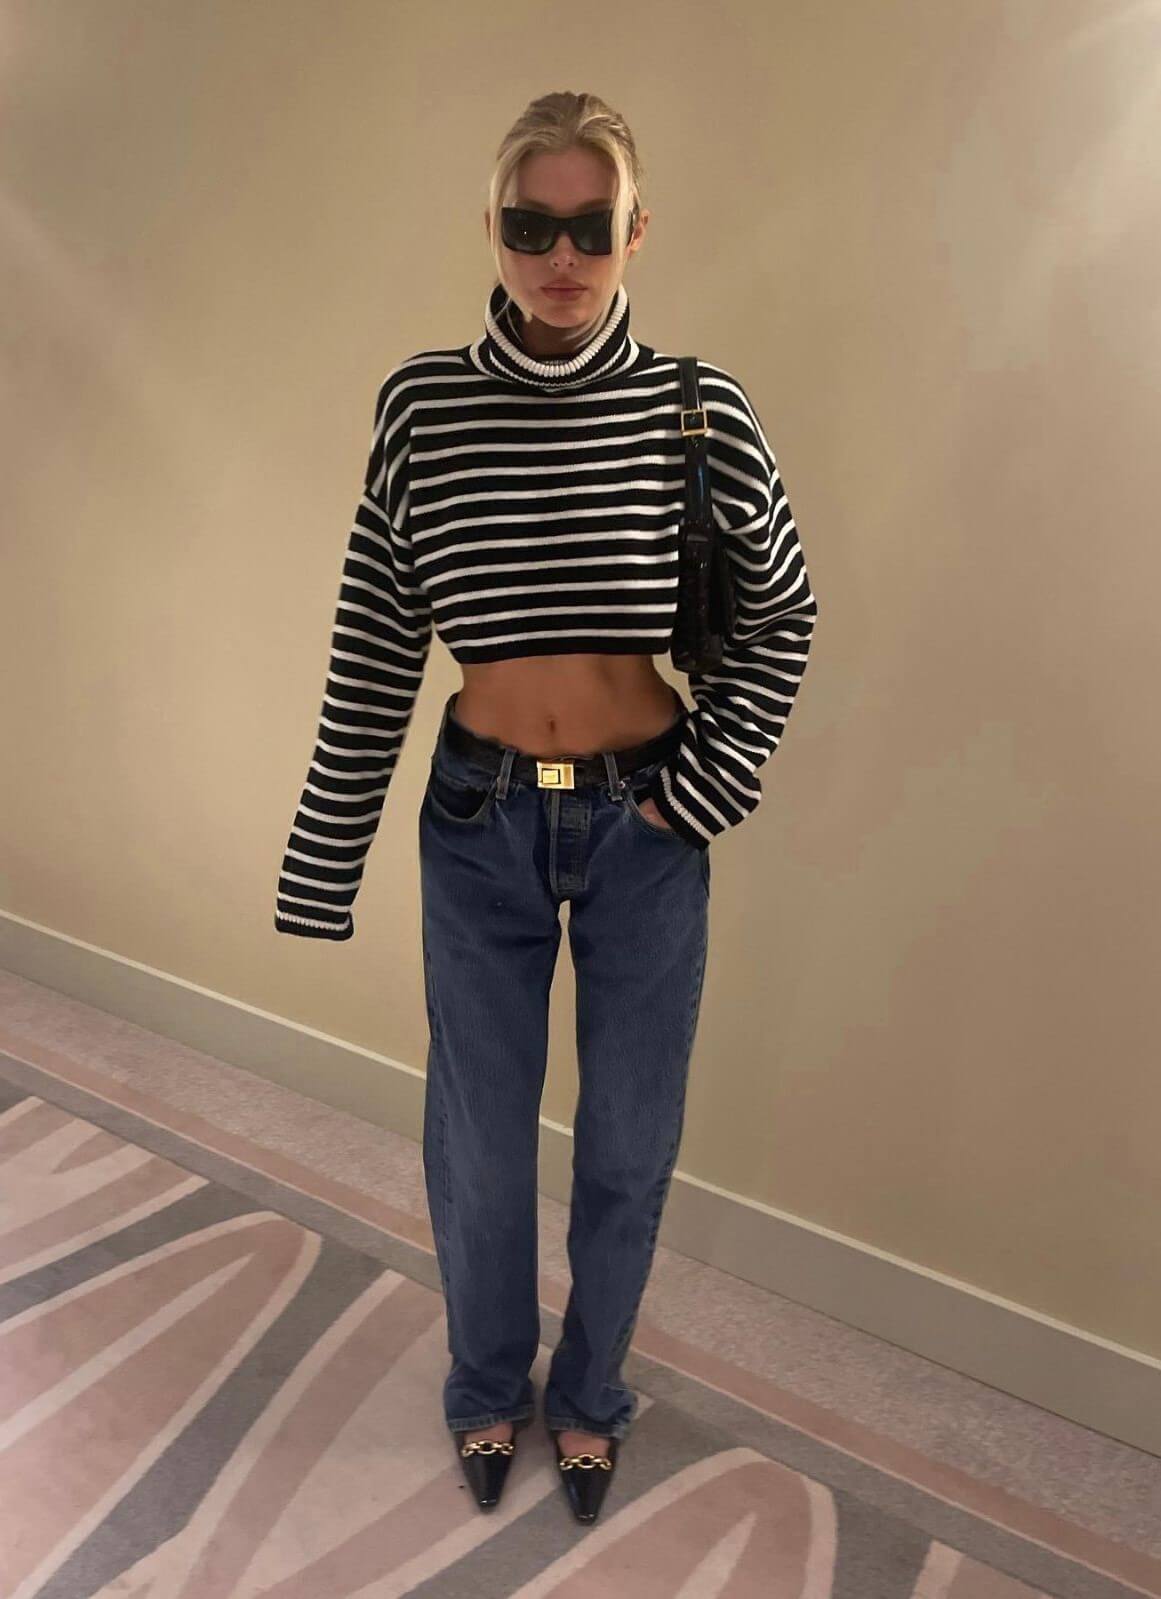 Elsa Hosk In Striped Woven Top With Jeans